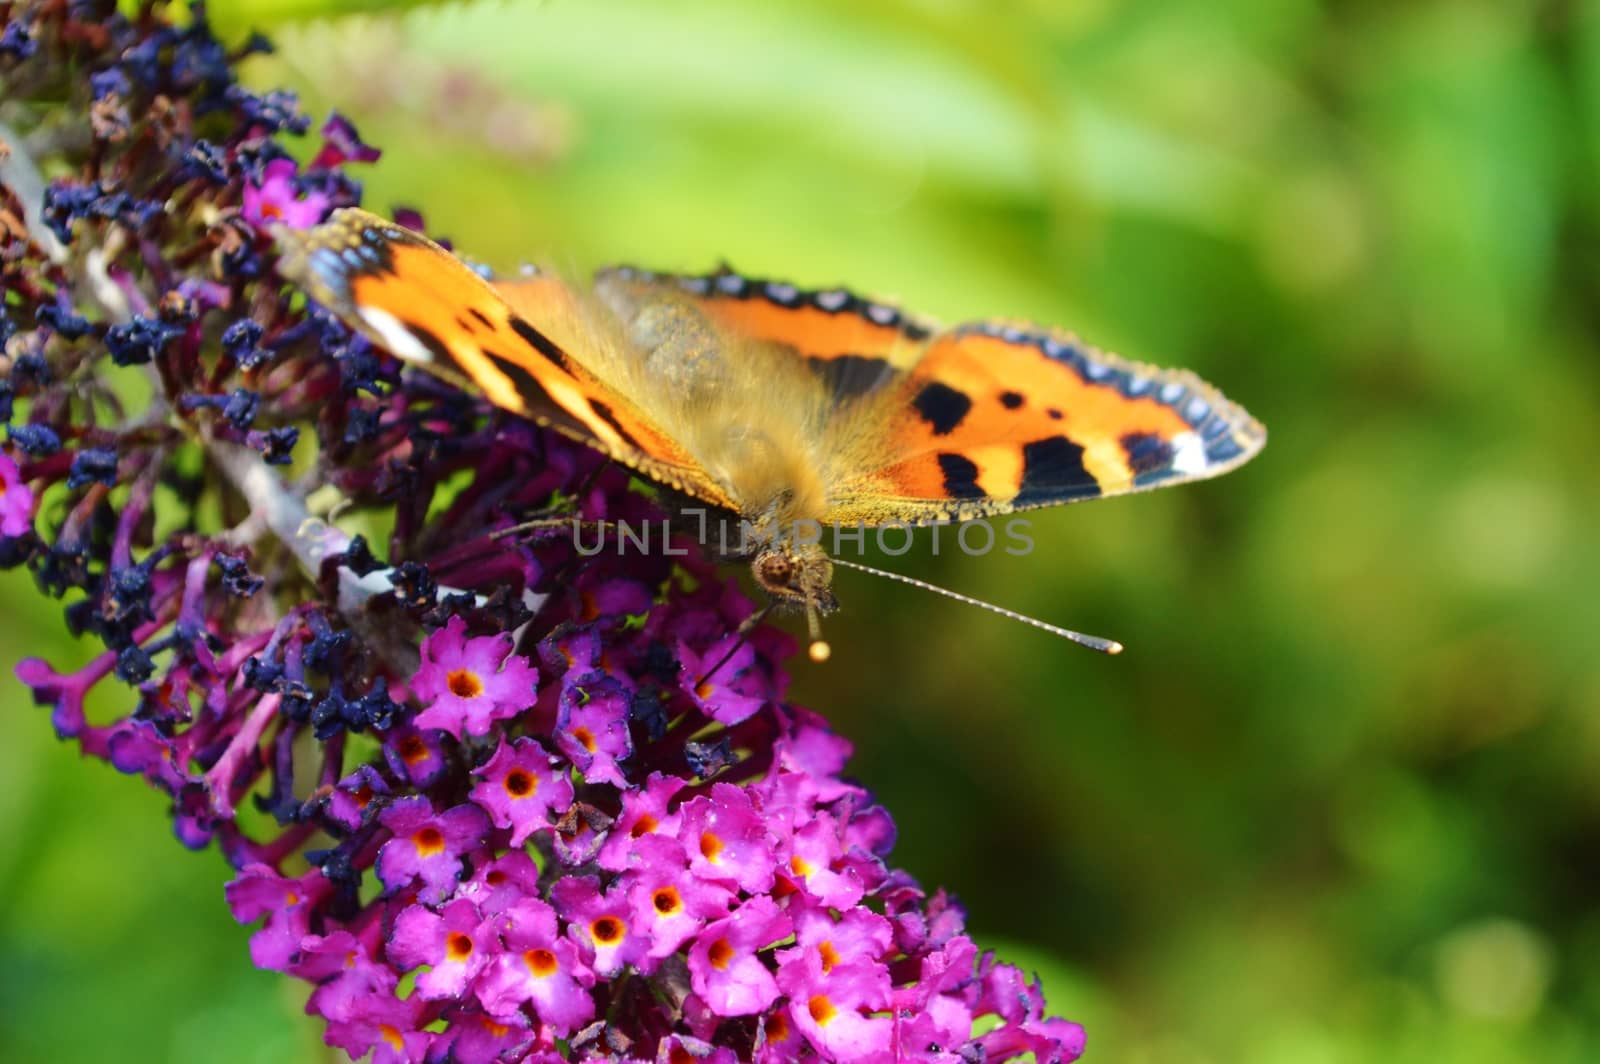 Close-up image of a Small Tortoiseshell Butterfly.